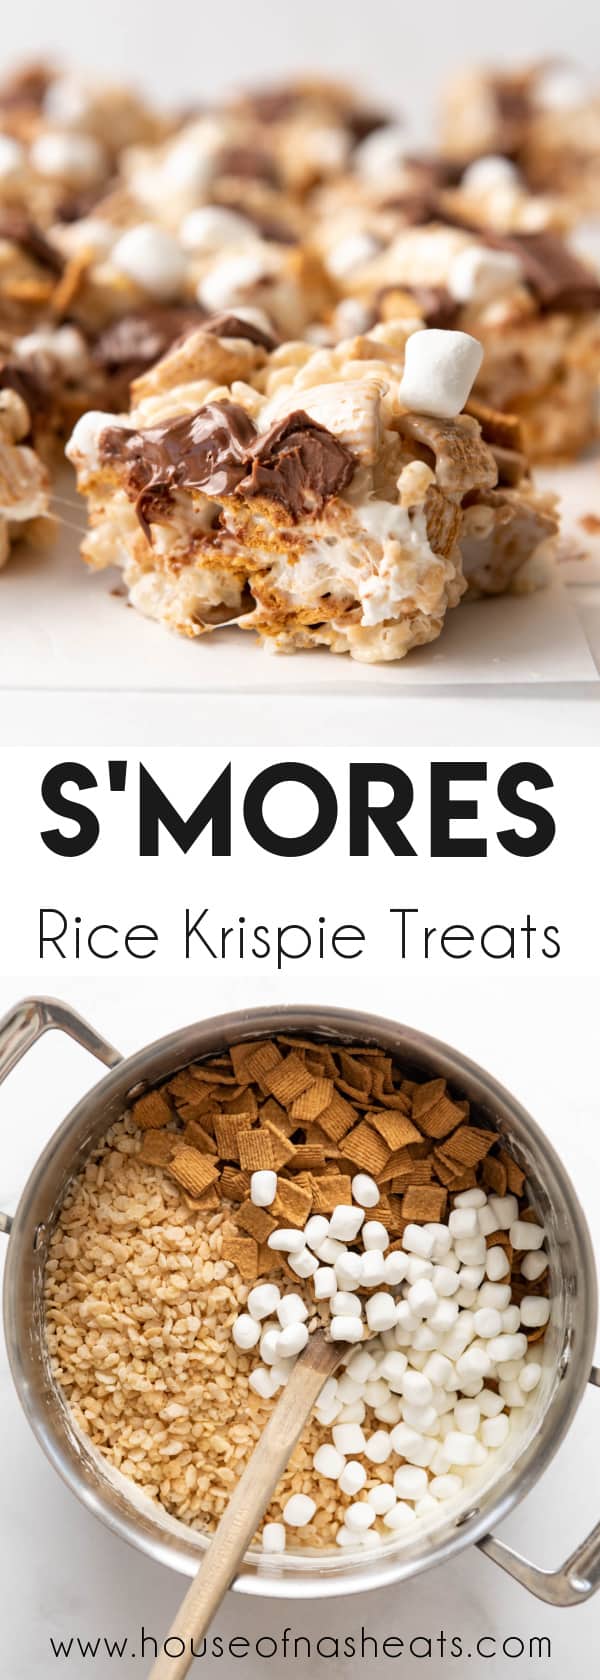 A collage of s'mores rice krispie treats images with text overlay.